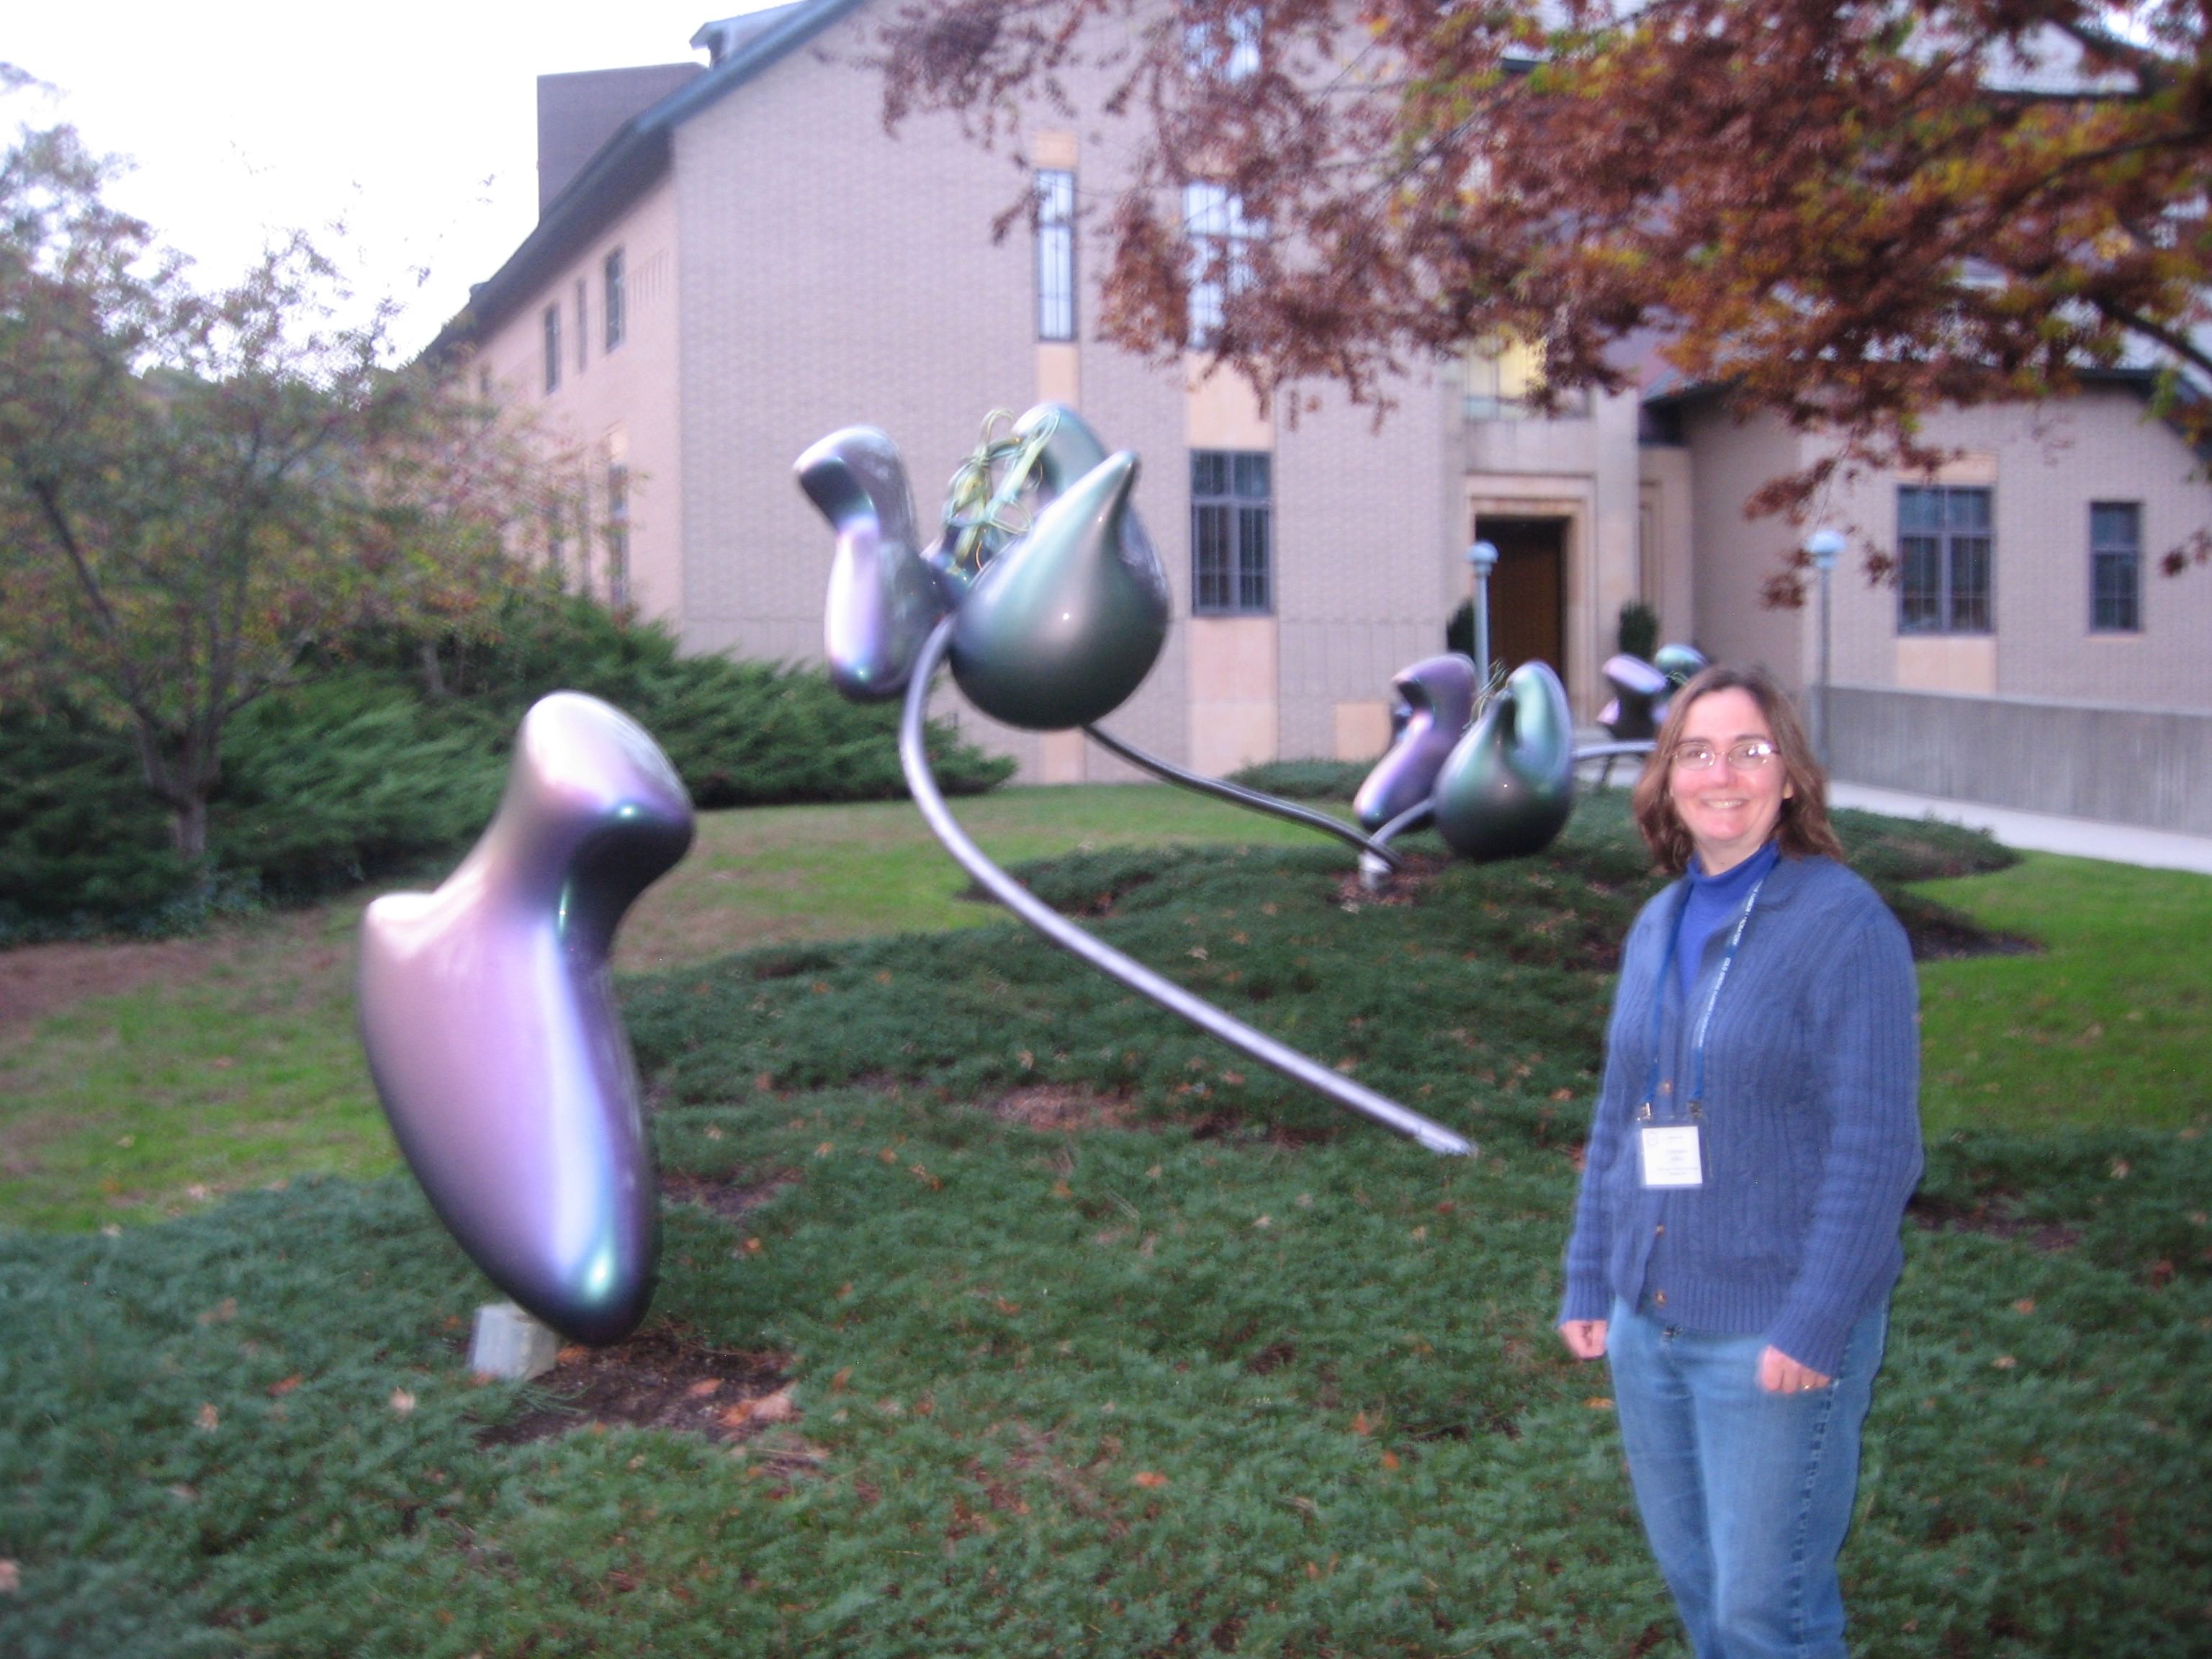 Constance Jeffery poses in front of a ribosome sculpture at a Cold Spring Harbor meeting.